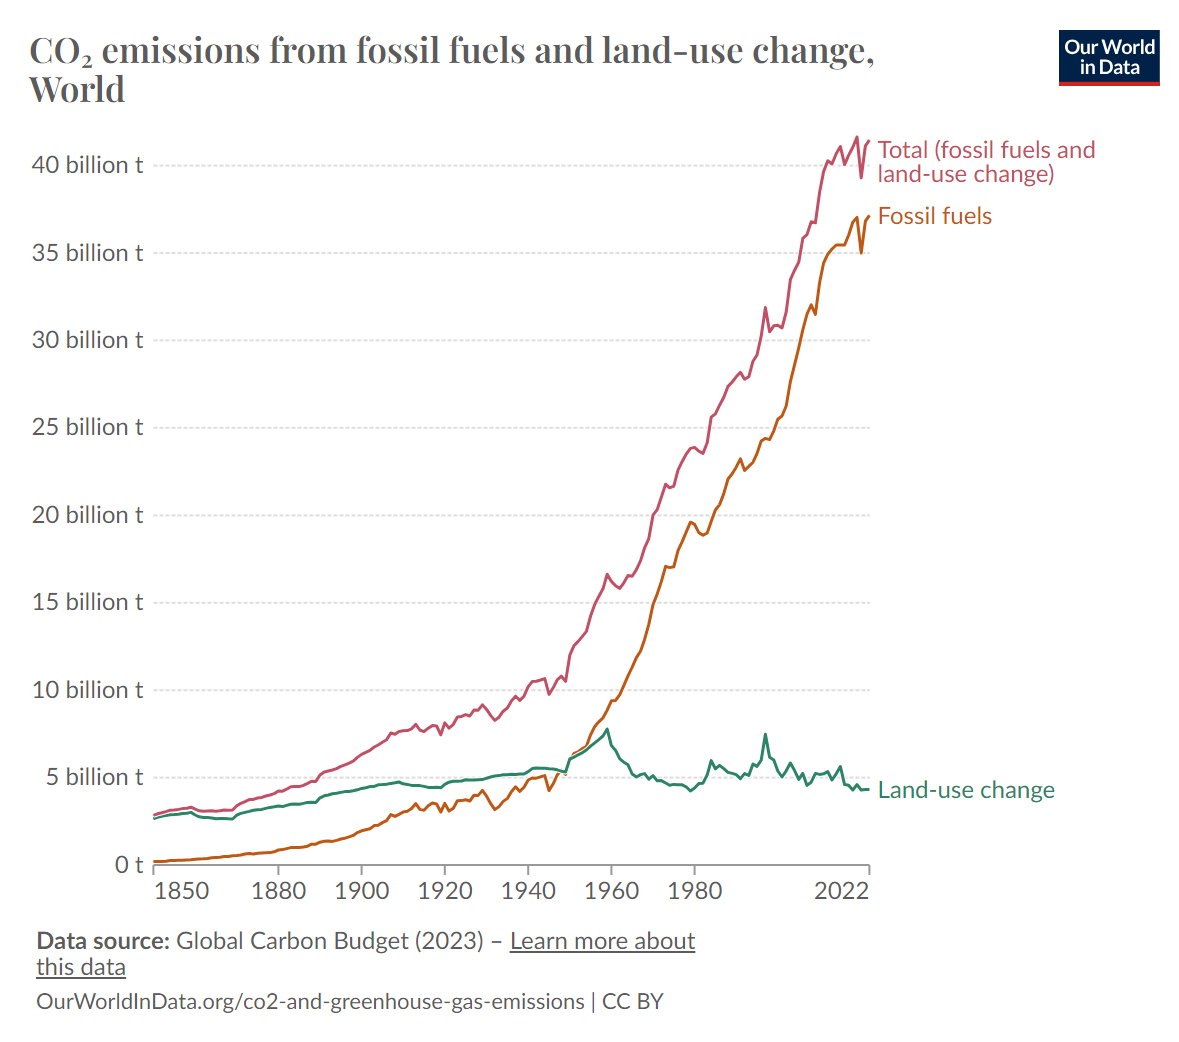 Graph showing CO2 emissions from fossil fuels and land-use change since 1850